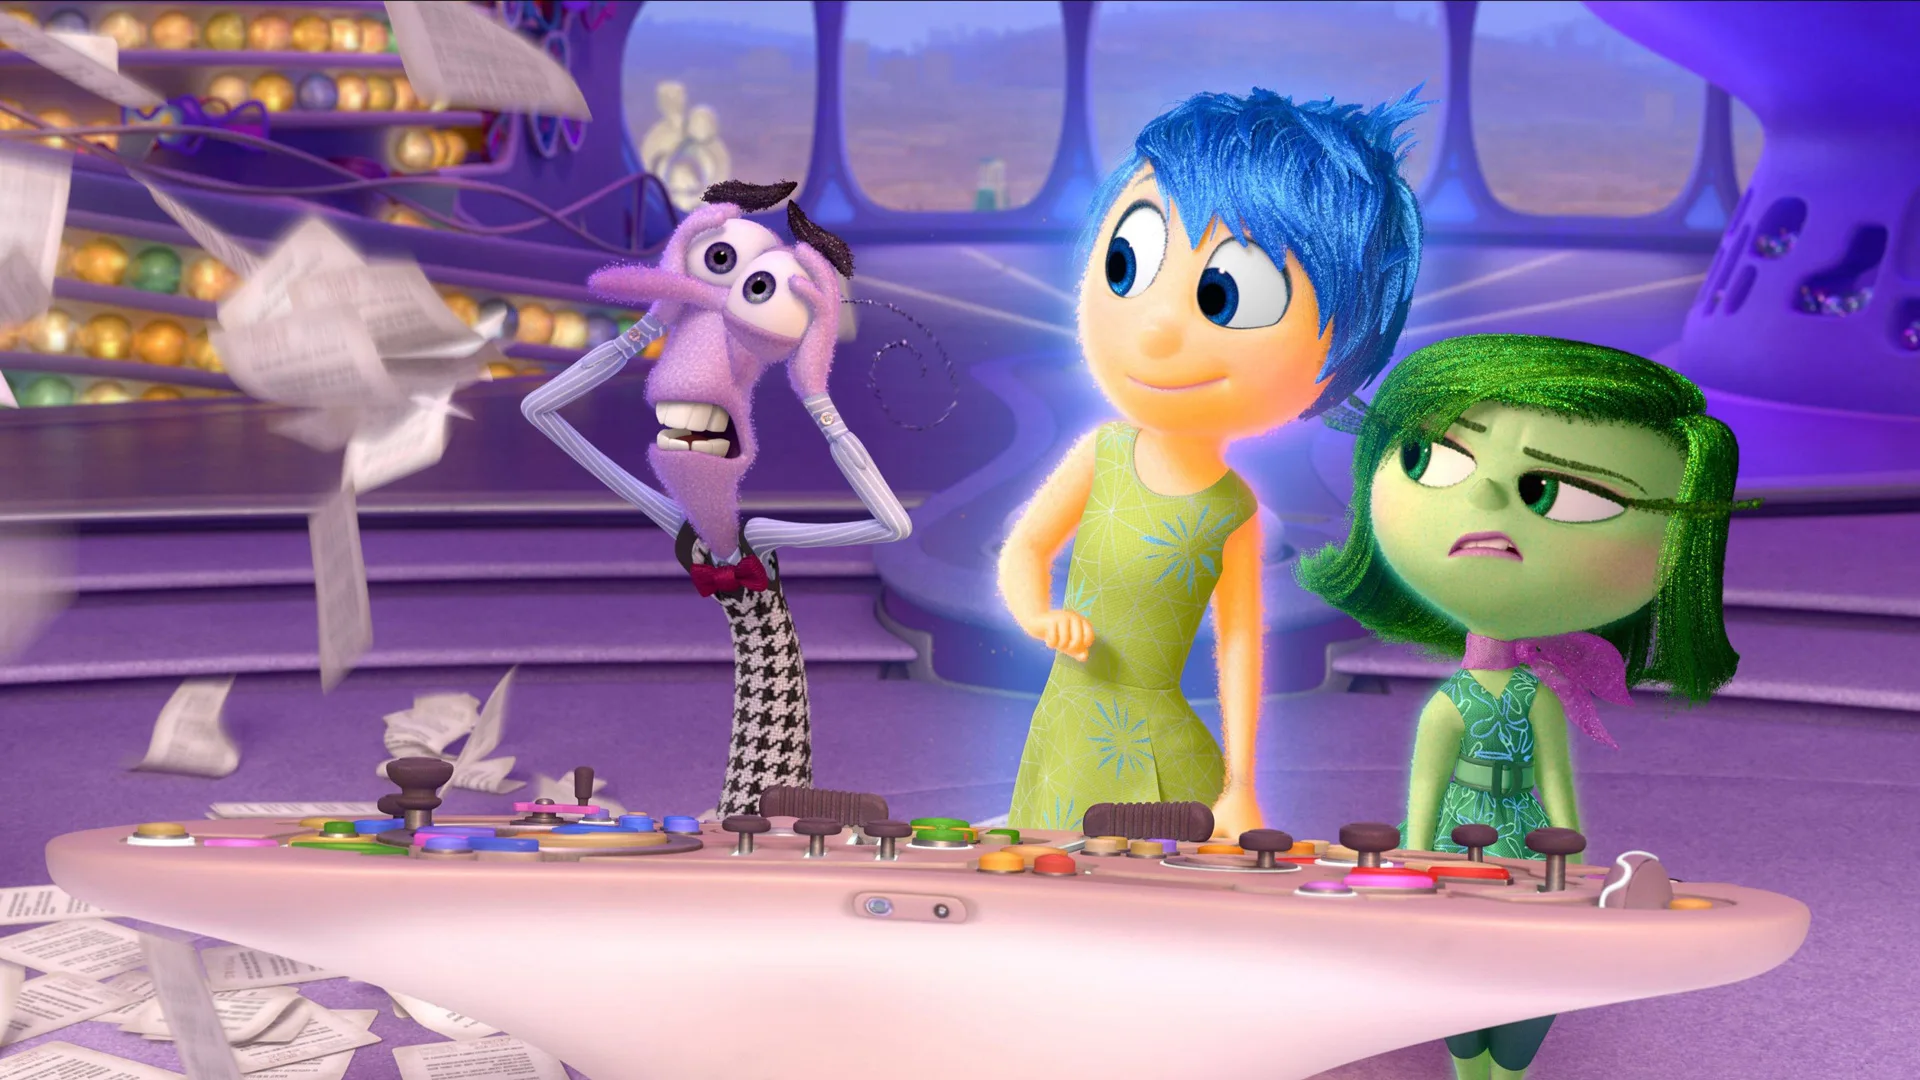 A scene from Inside Out showing Fear having a freakout as Joy and Disgust look on whilst all stood at the control panel